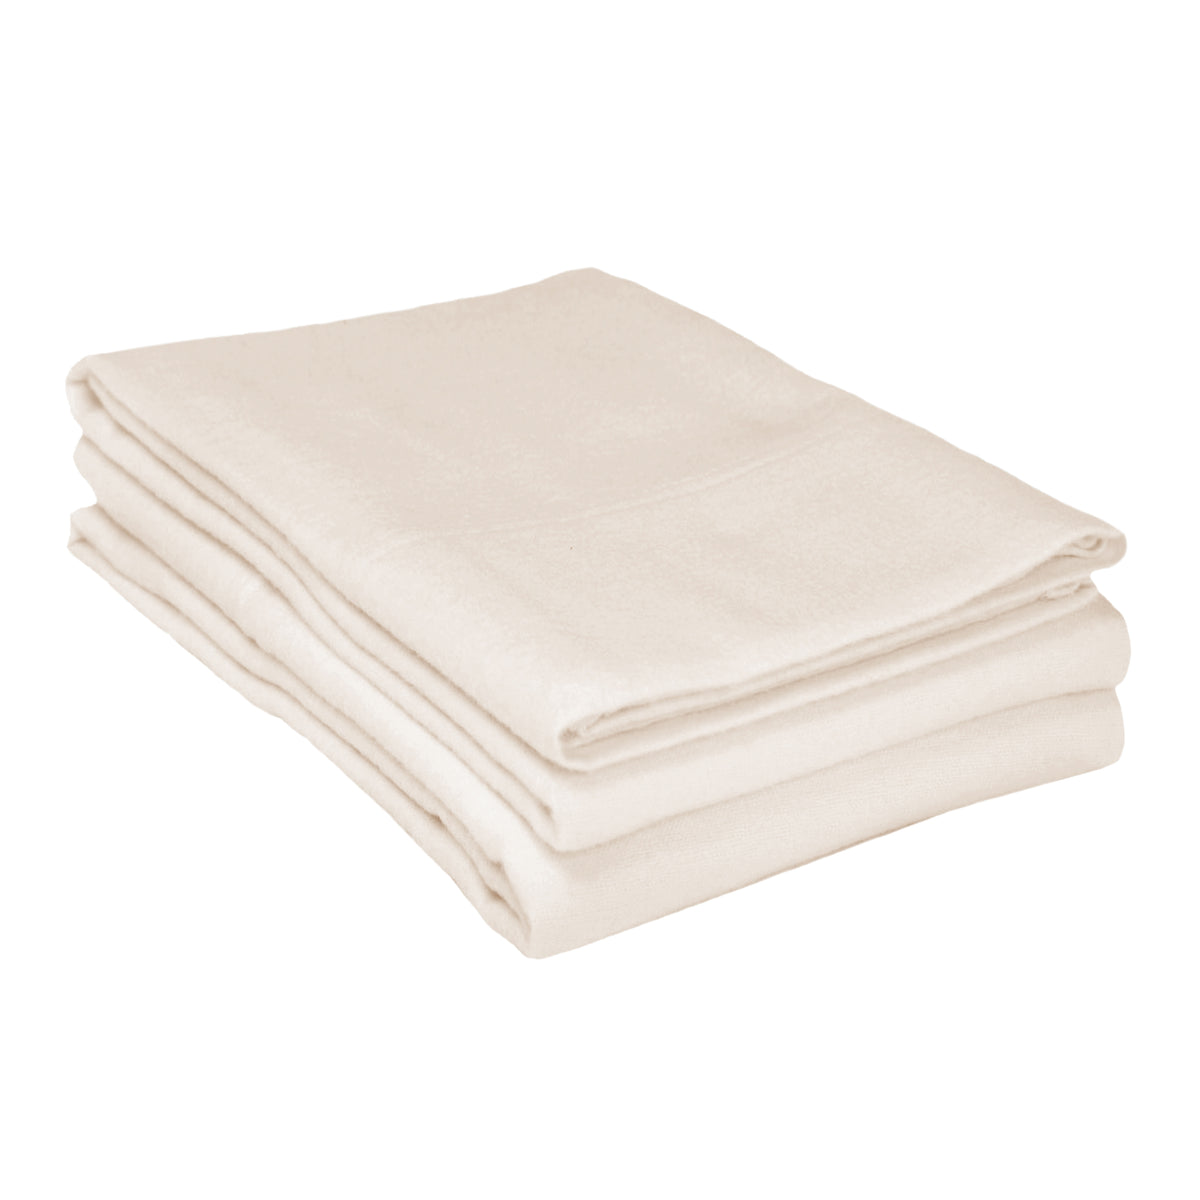 Solid Flannel Cotton Soft Fuzzy Pillowcases, Set of 2 - Ivory